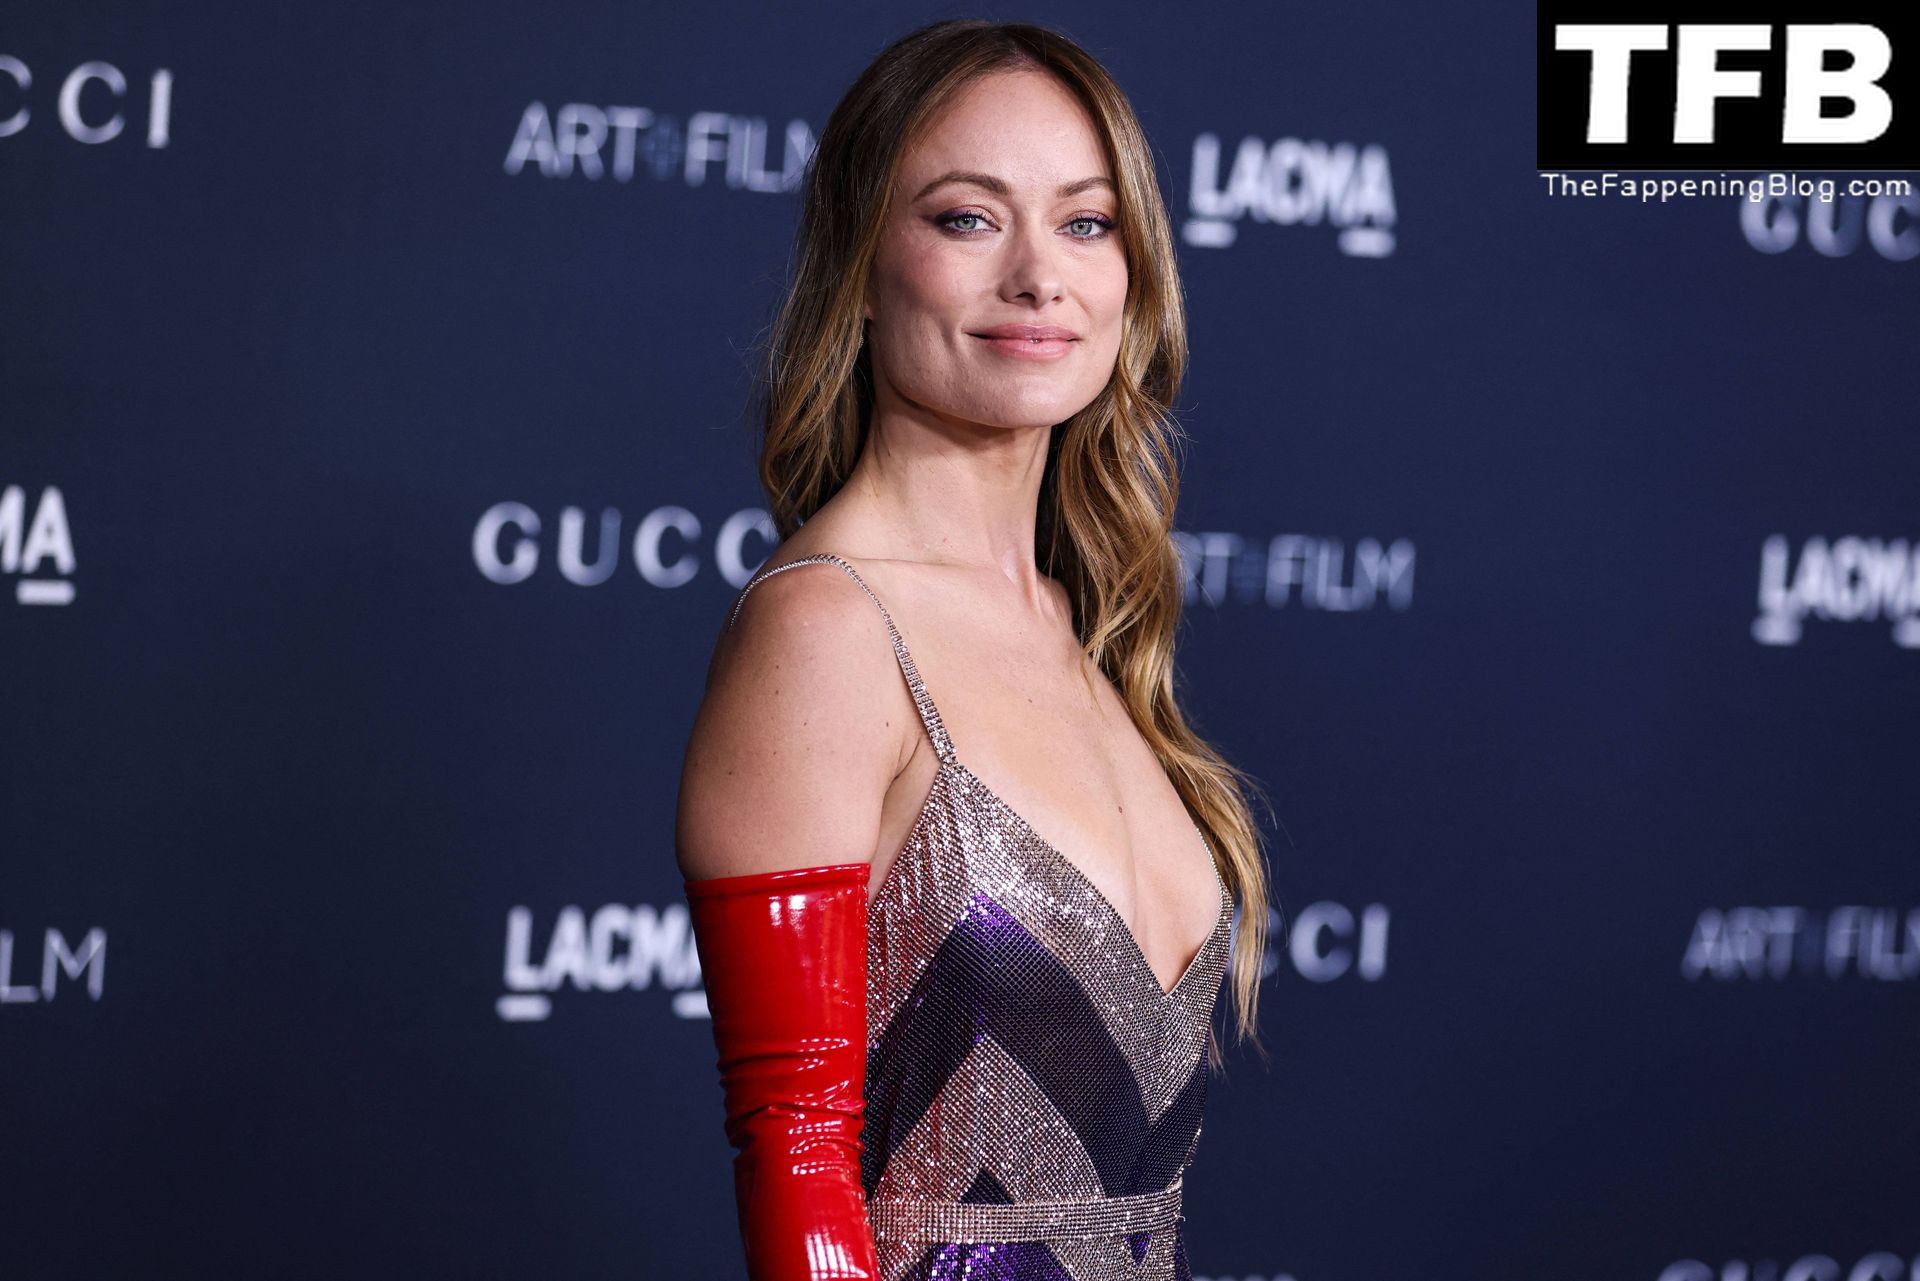 Olivia-Wilde-Sexy-The-Fappening-Blog-23.jpg